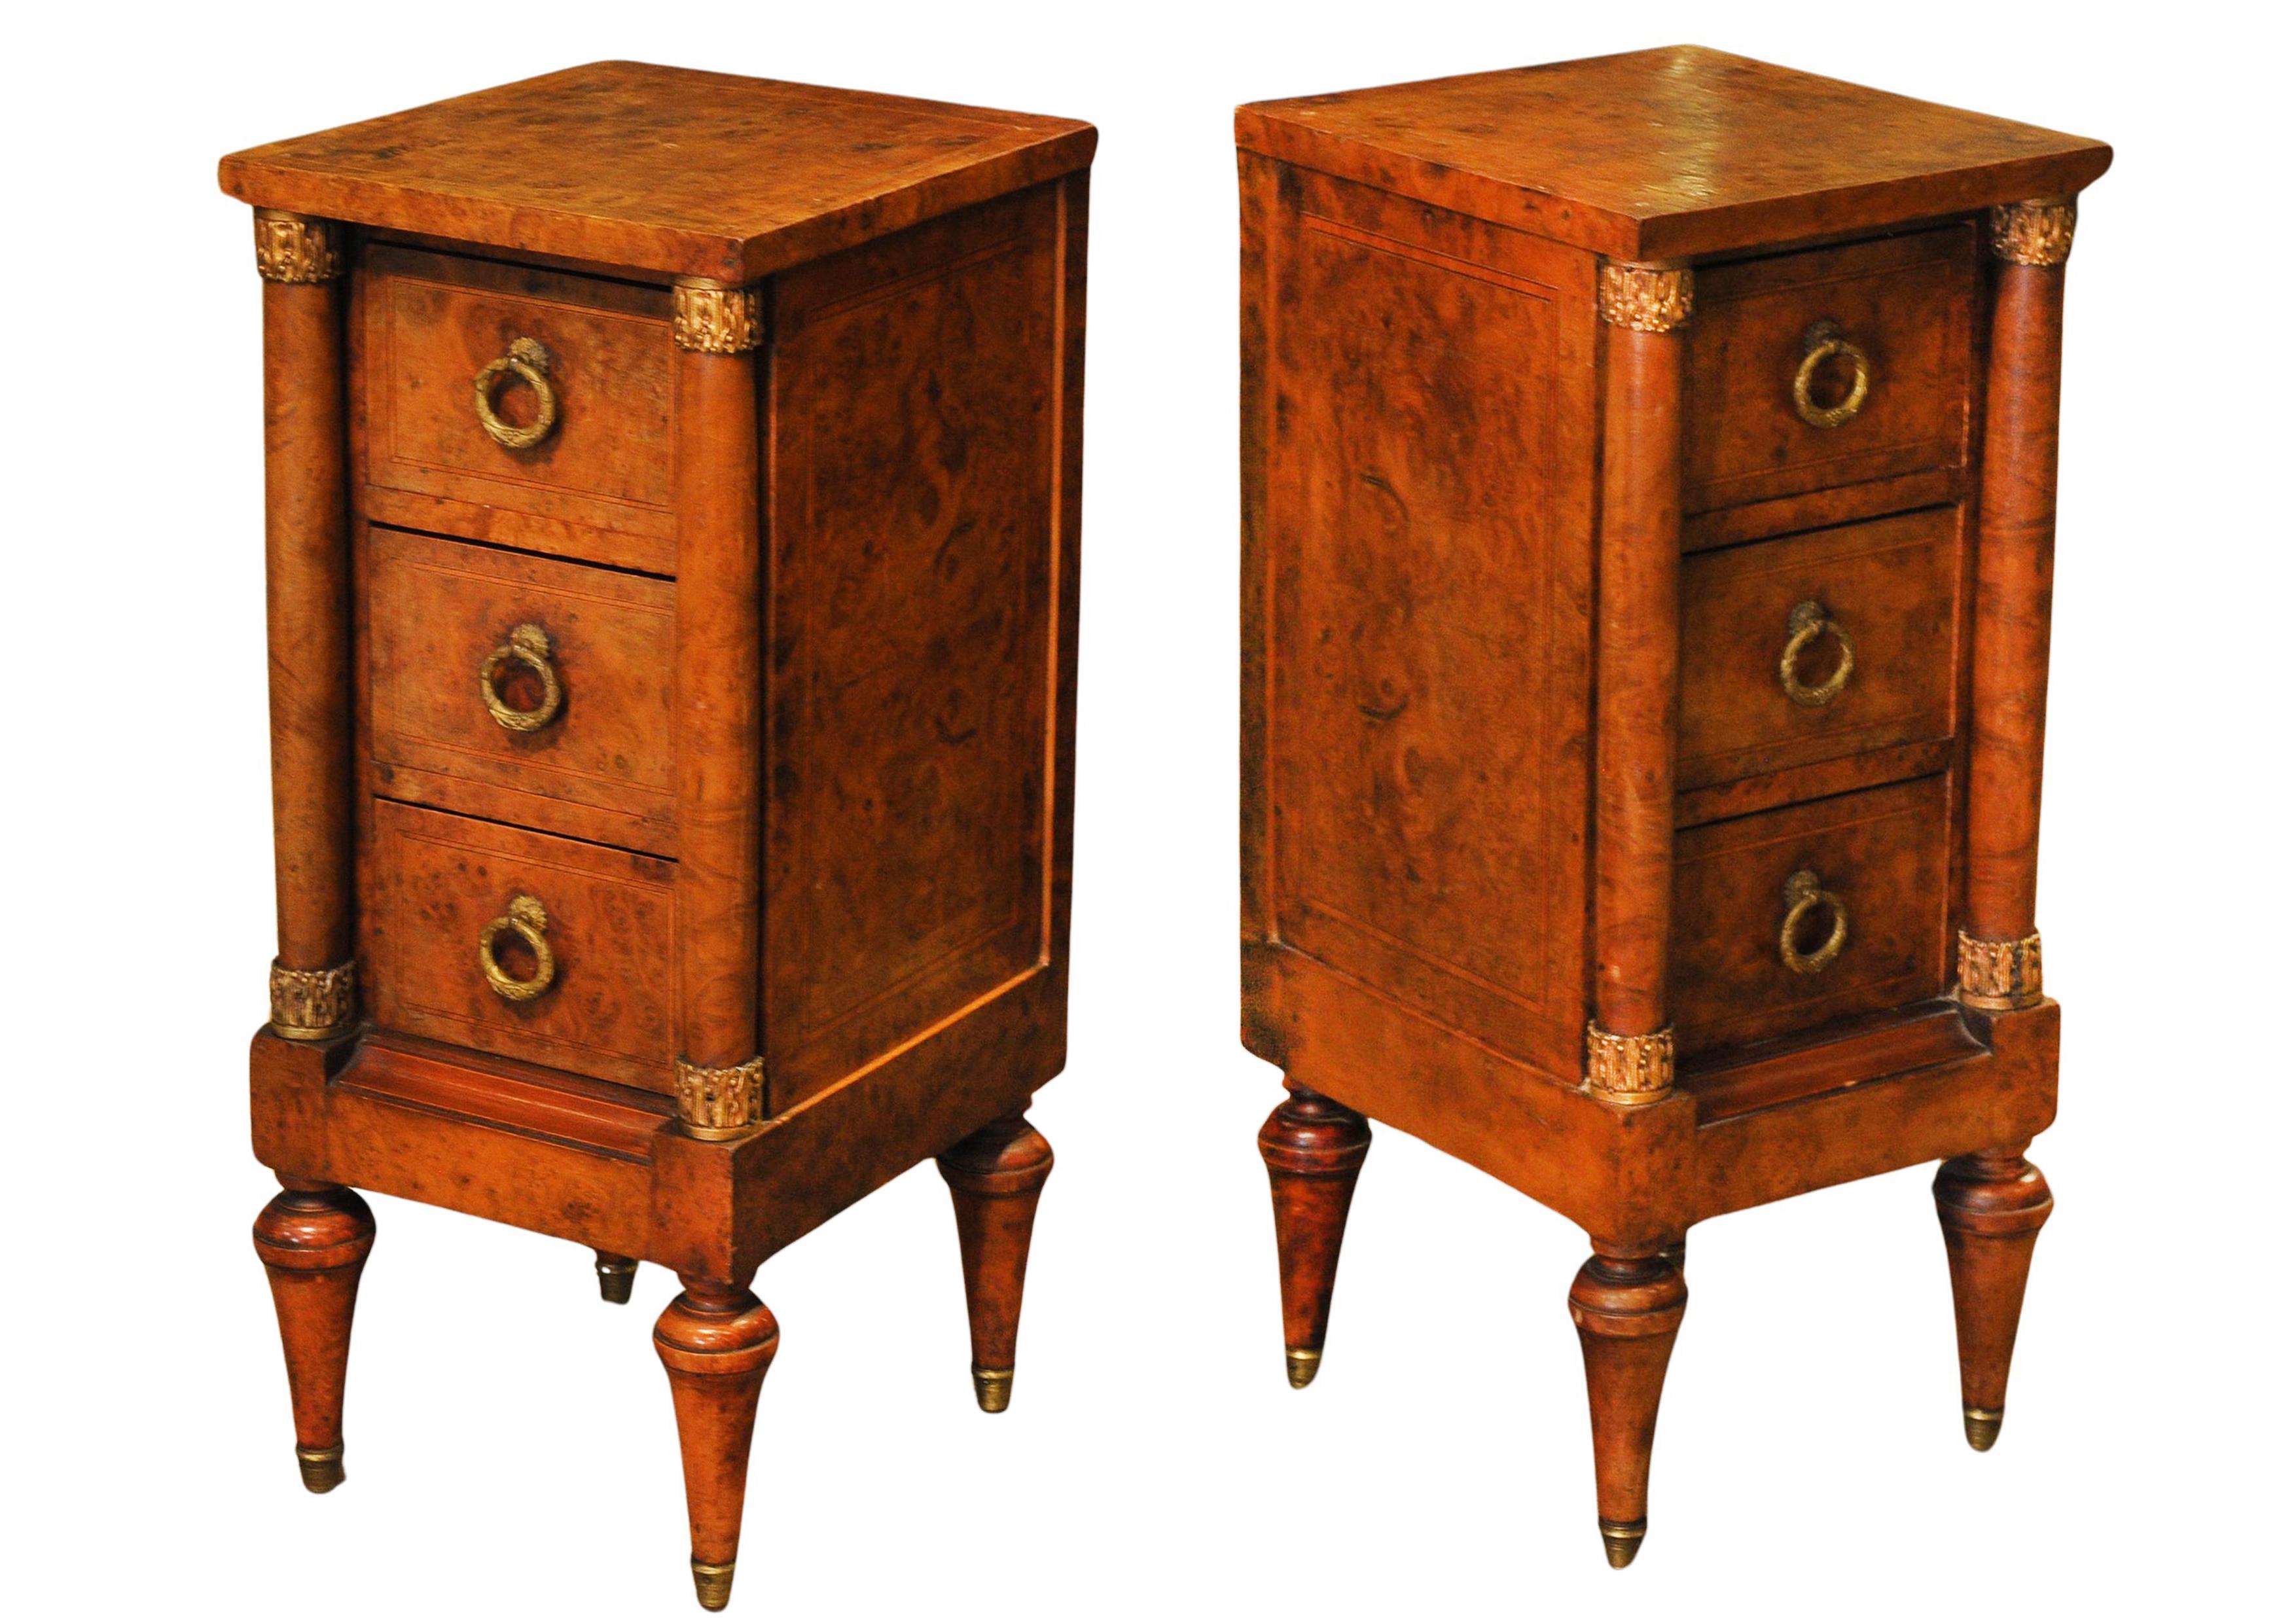 A Pair of French Empire Design Figured Walnut Three Drawer Nightstand Chests With Mounted Gilt 

Provenance: From an Establishment on Belgrave Square London see images7

Known to be one of the most prestigious addresses in the country, Belgrave